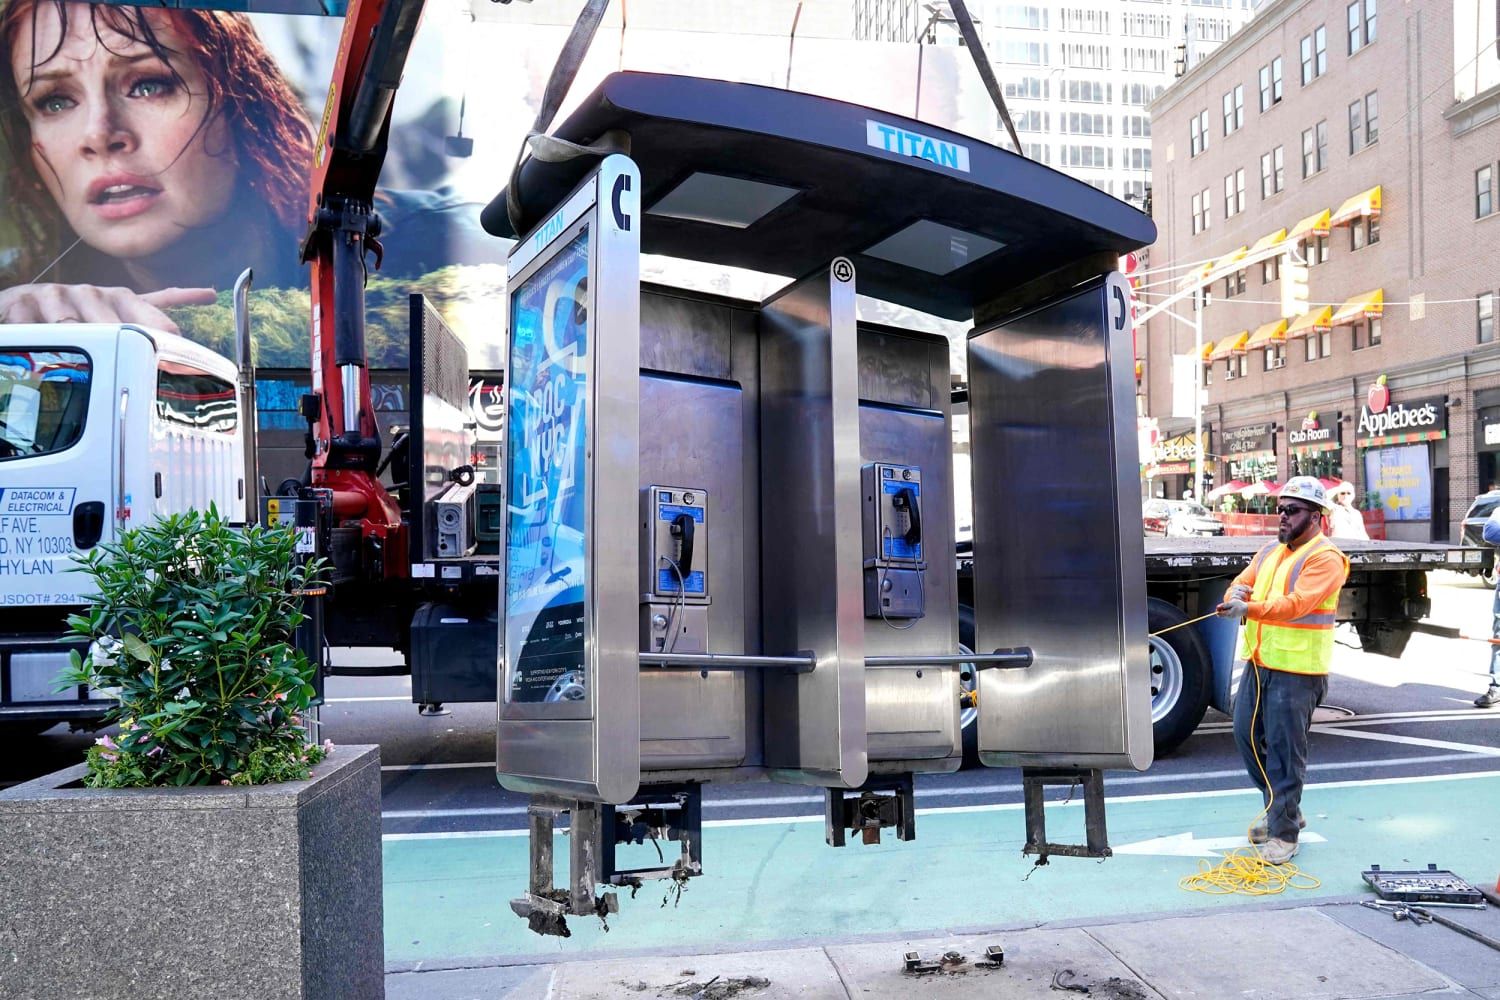 End of an era: Last street payphone in New York City removed